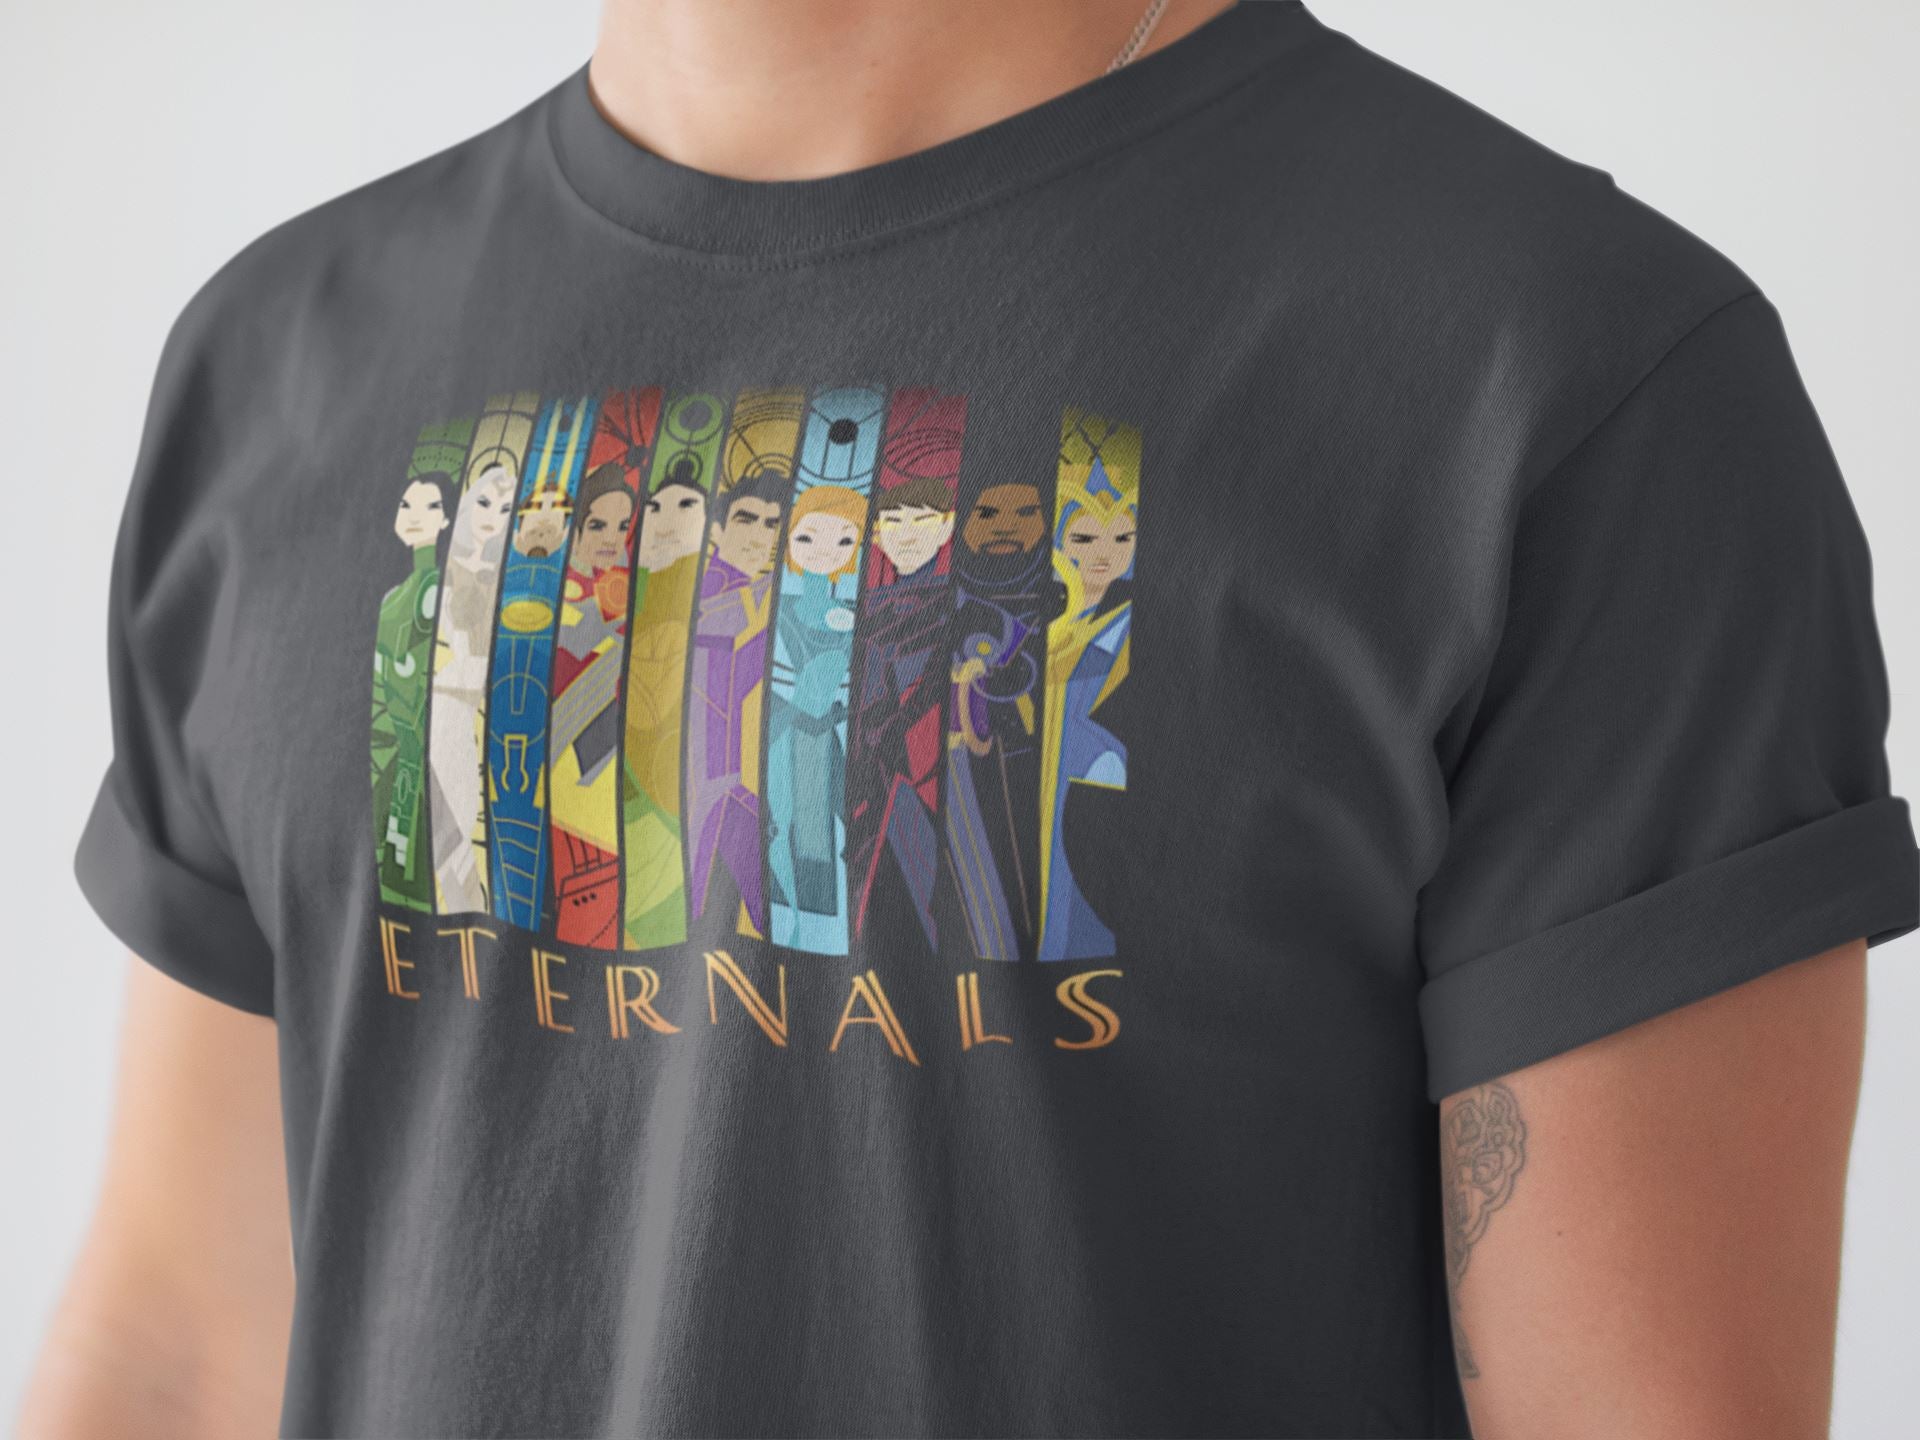 The Eternals Comic Book Version Official Black T Shirt for Men and Women freeshipping - Catch My Drift India